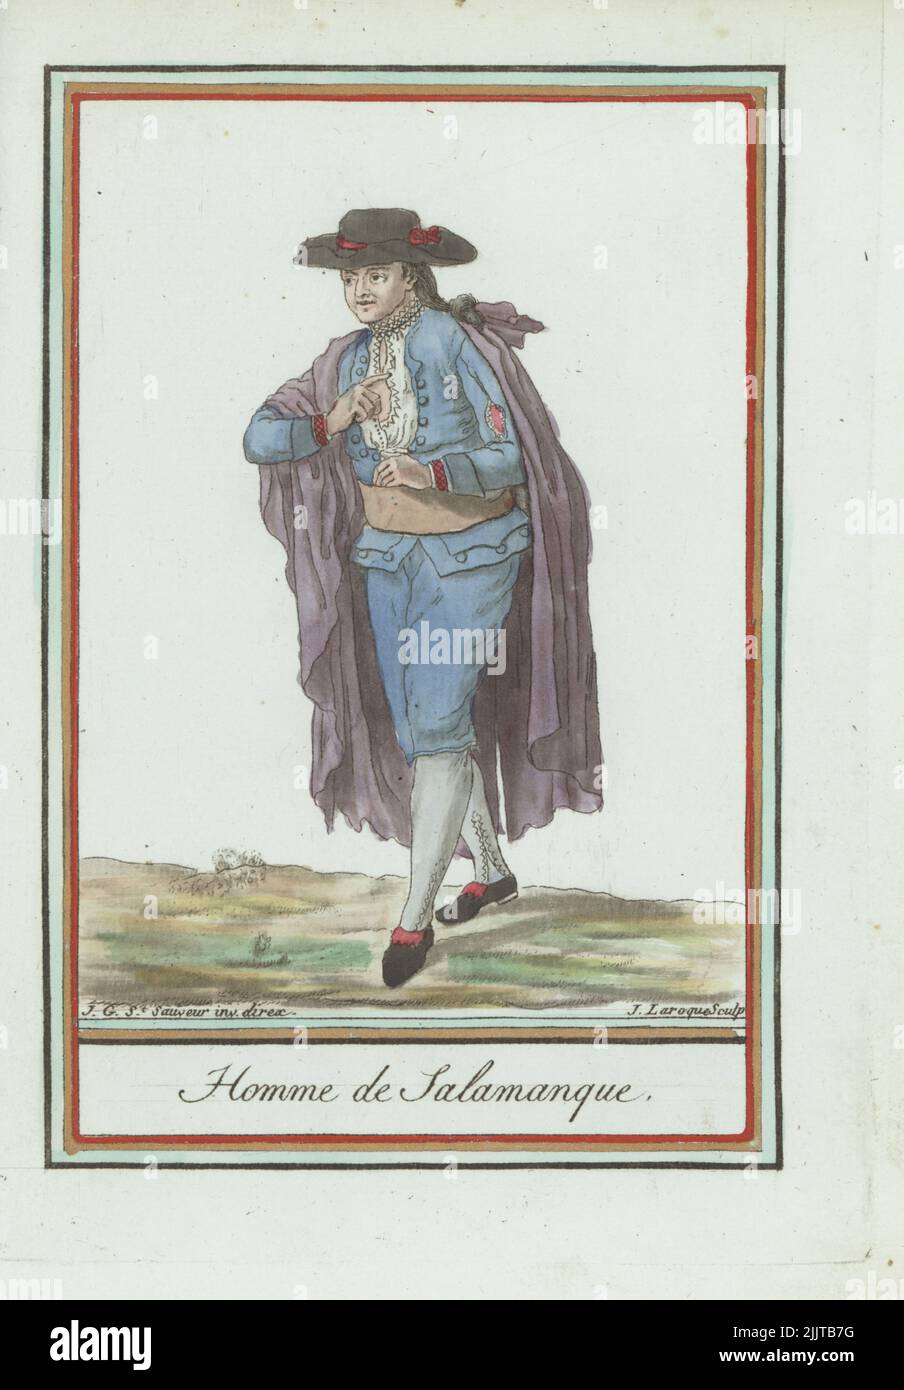 Man of Salamanca, Kingdom of Leon, Spain. In wide brim hat with cockade, long hair in a pigtail, embroidered shirt, matching waistcoat and culottes, wide belt, large Spanish cloak in contrasting colour. Homme de Salamanque, Royaume de Leon. Handcoloured copperplate engraving by J. Laroque after a design by Jacques Grasset de Saint-Sauveur from his Encyclopedie des voyages, Encyclopedia of Voyages, Bordeaux, France, 1792. Stock Photo